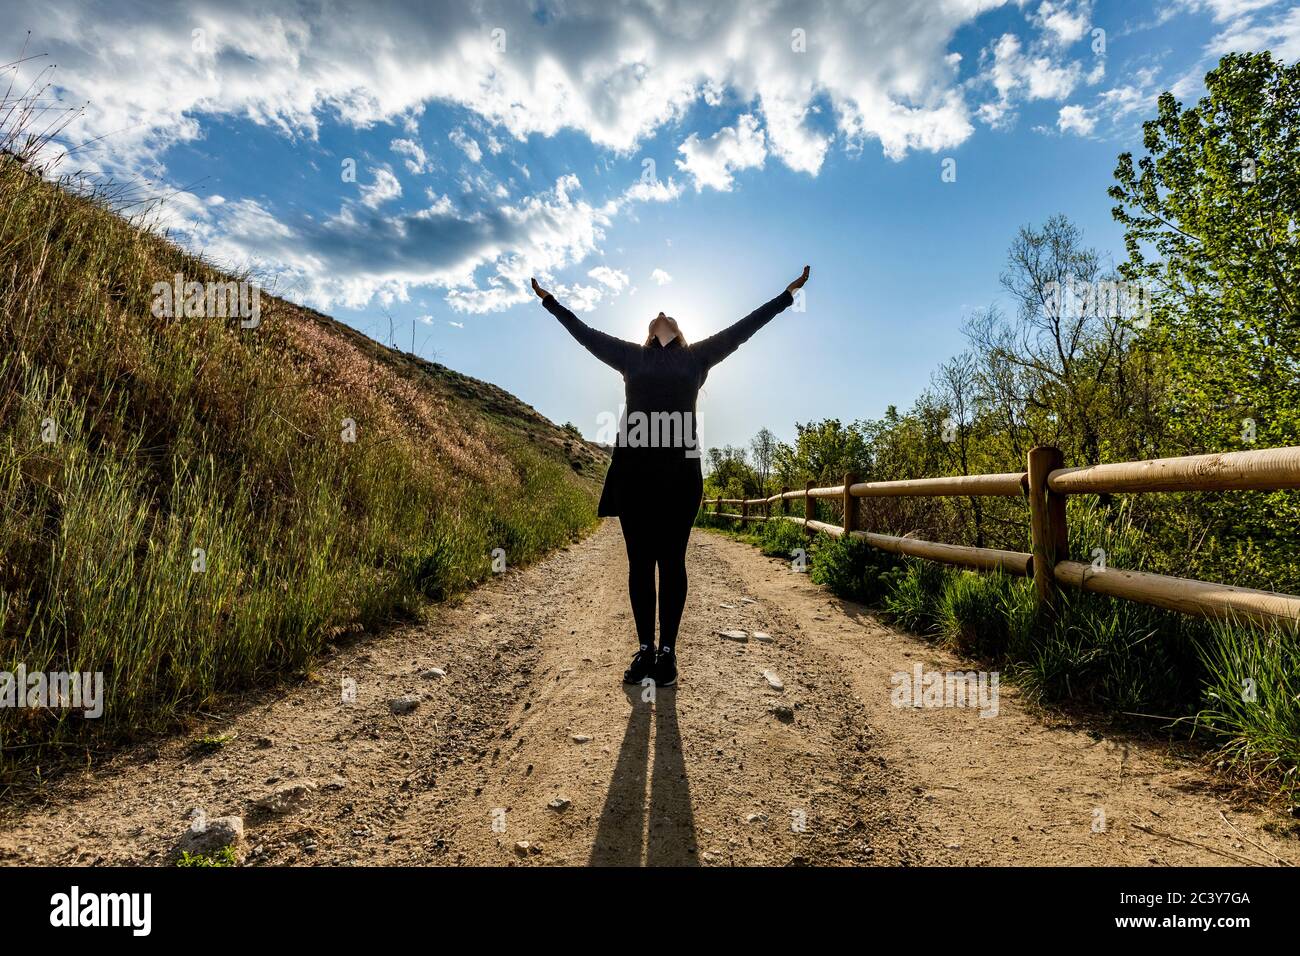 USA, Idaho, Boise, Woman standing in footpath with arms raised Stock Photo